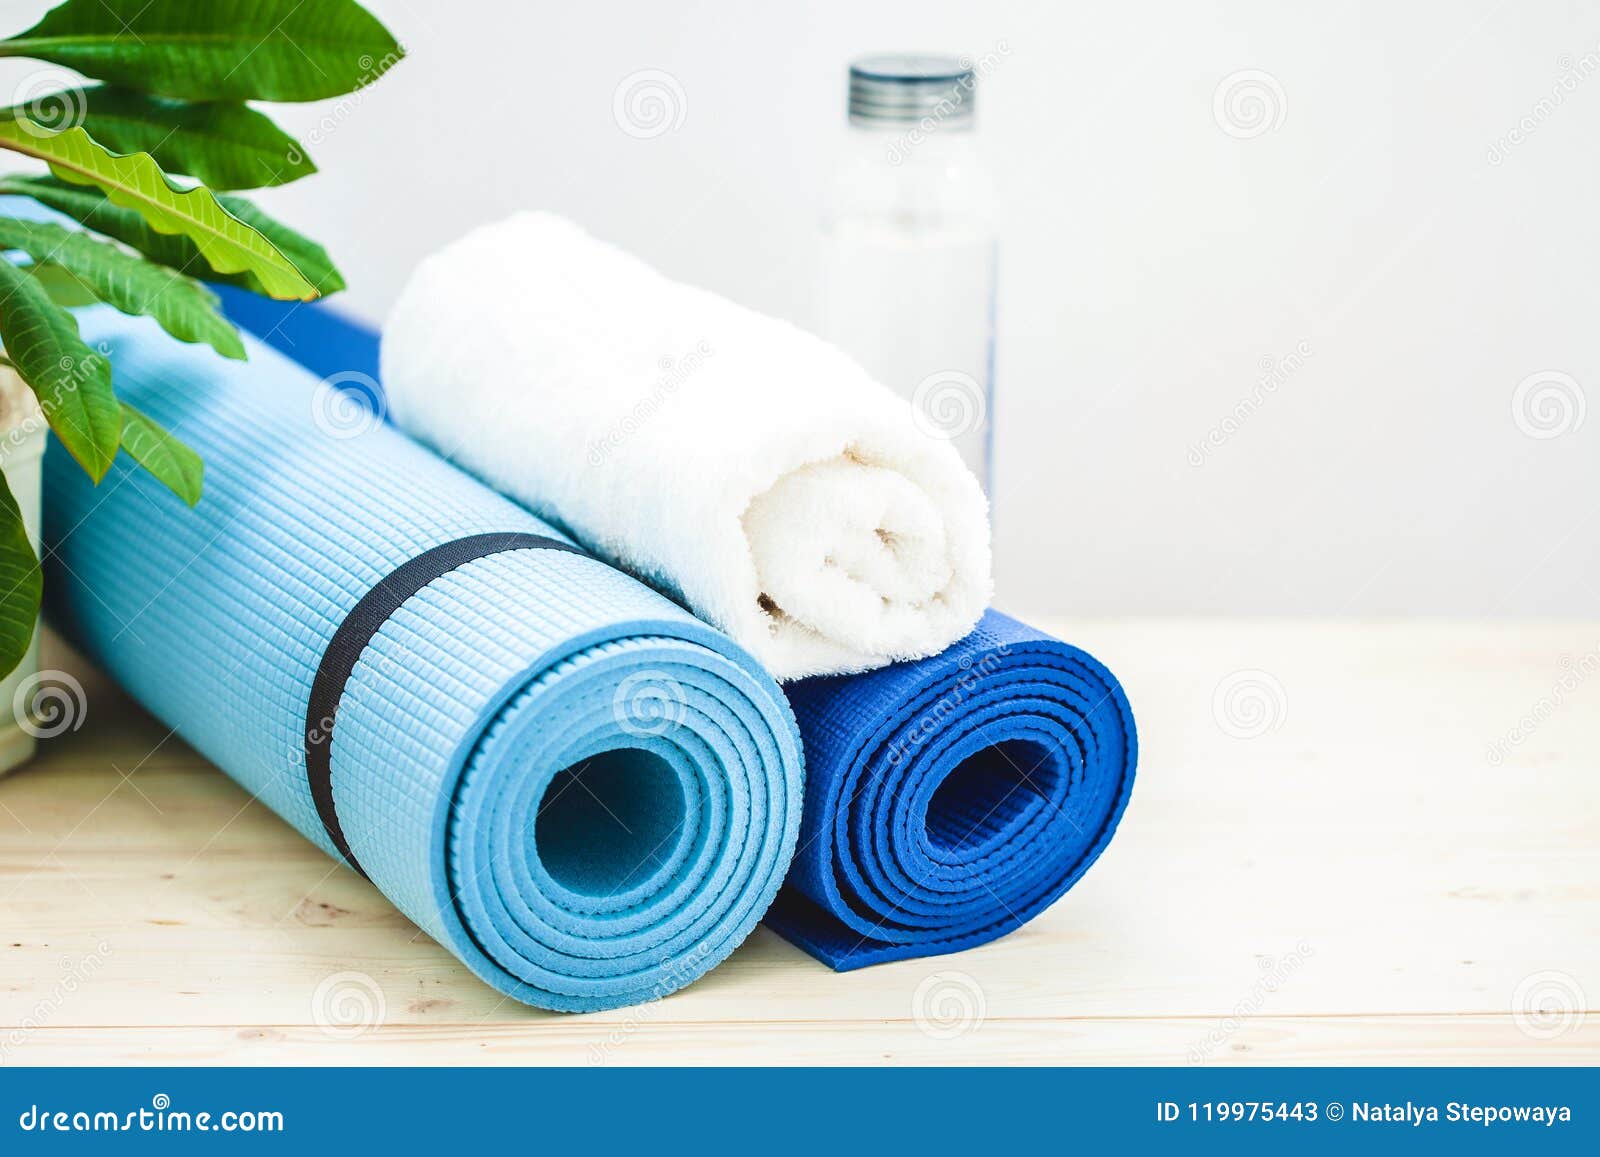 Set for Sports, a Yoga Mat, a Towel, a Bottle of Water on a Light  Background. the Concept of a Healthy Lifestyle. Copy Space Stock Image -  Image of green, closeup: 119975443